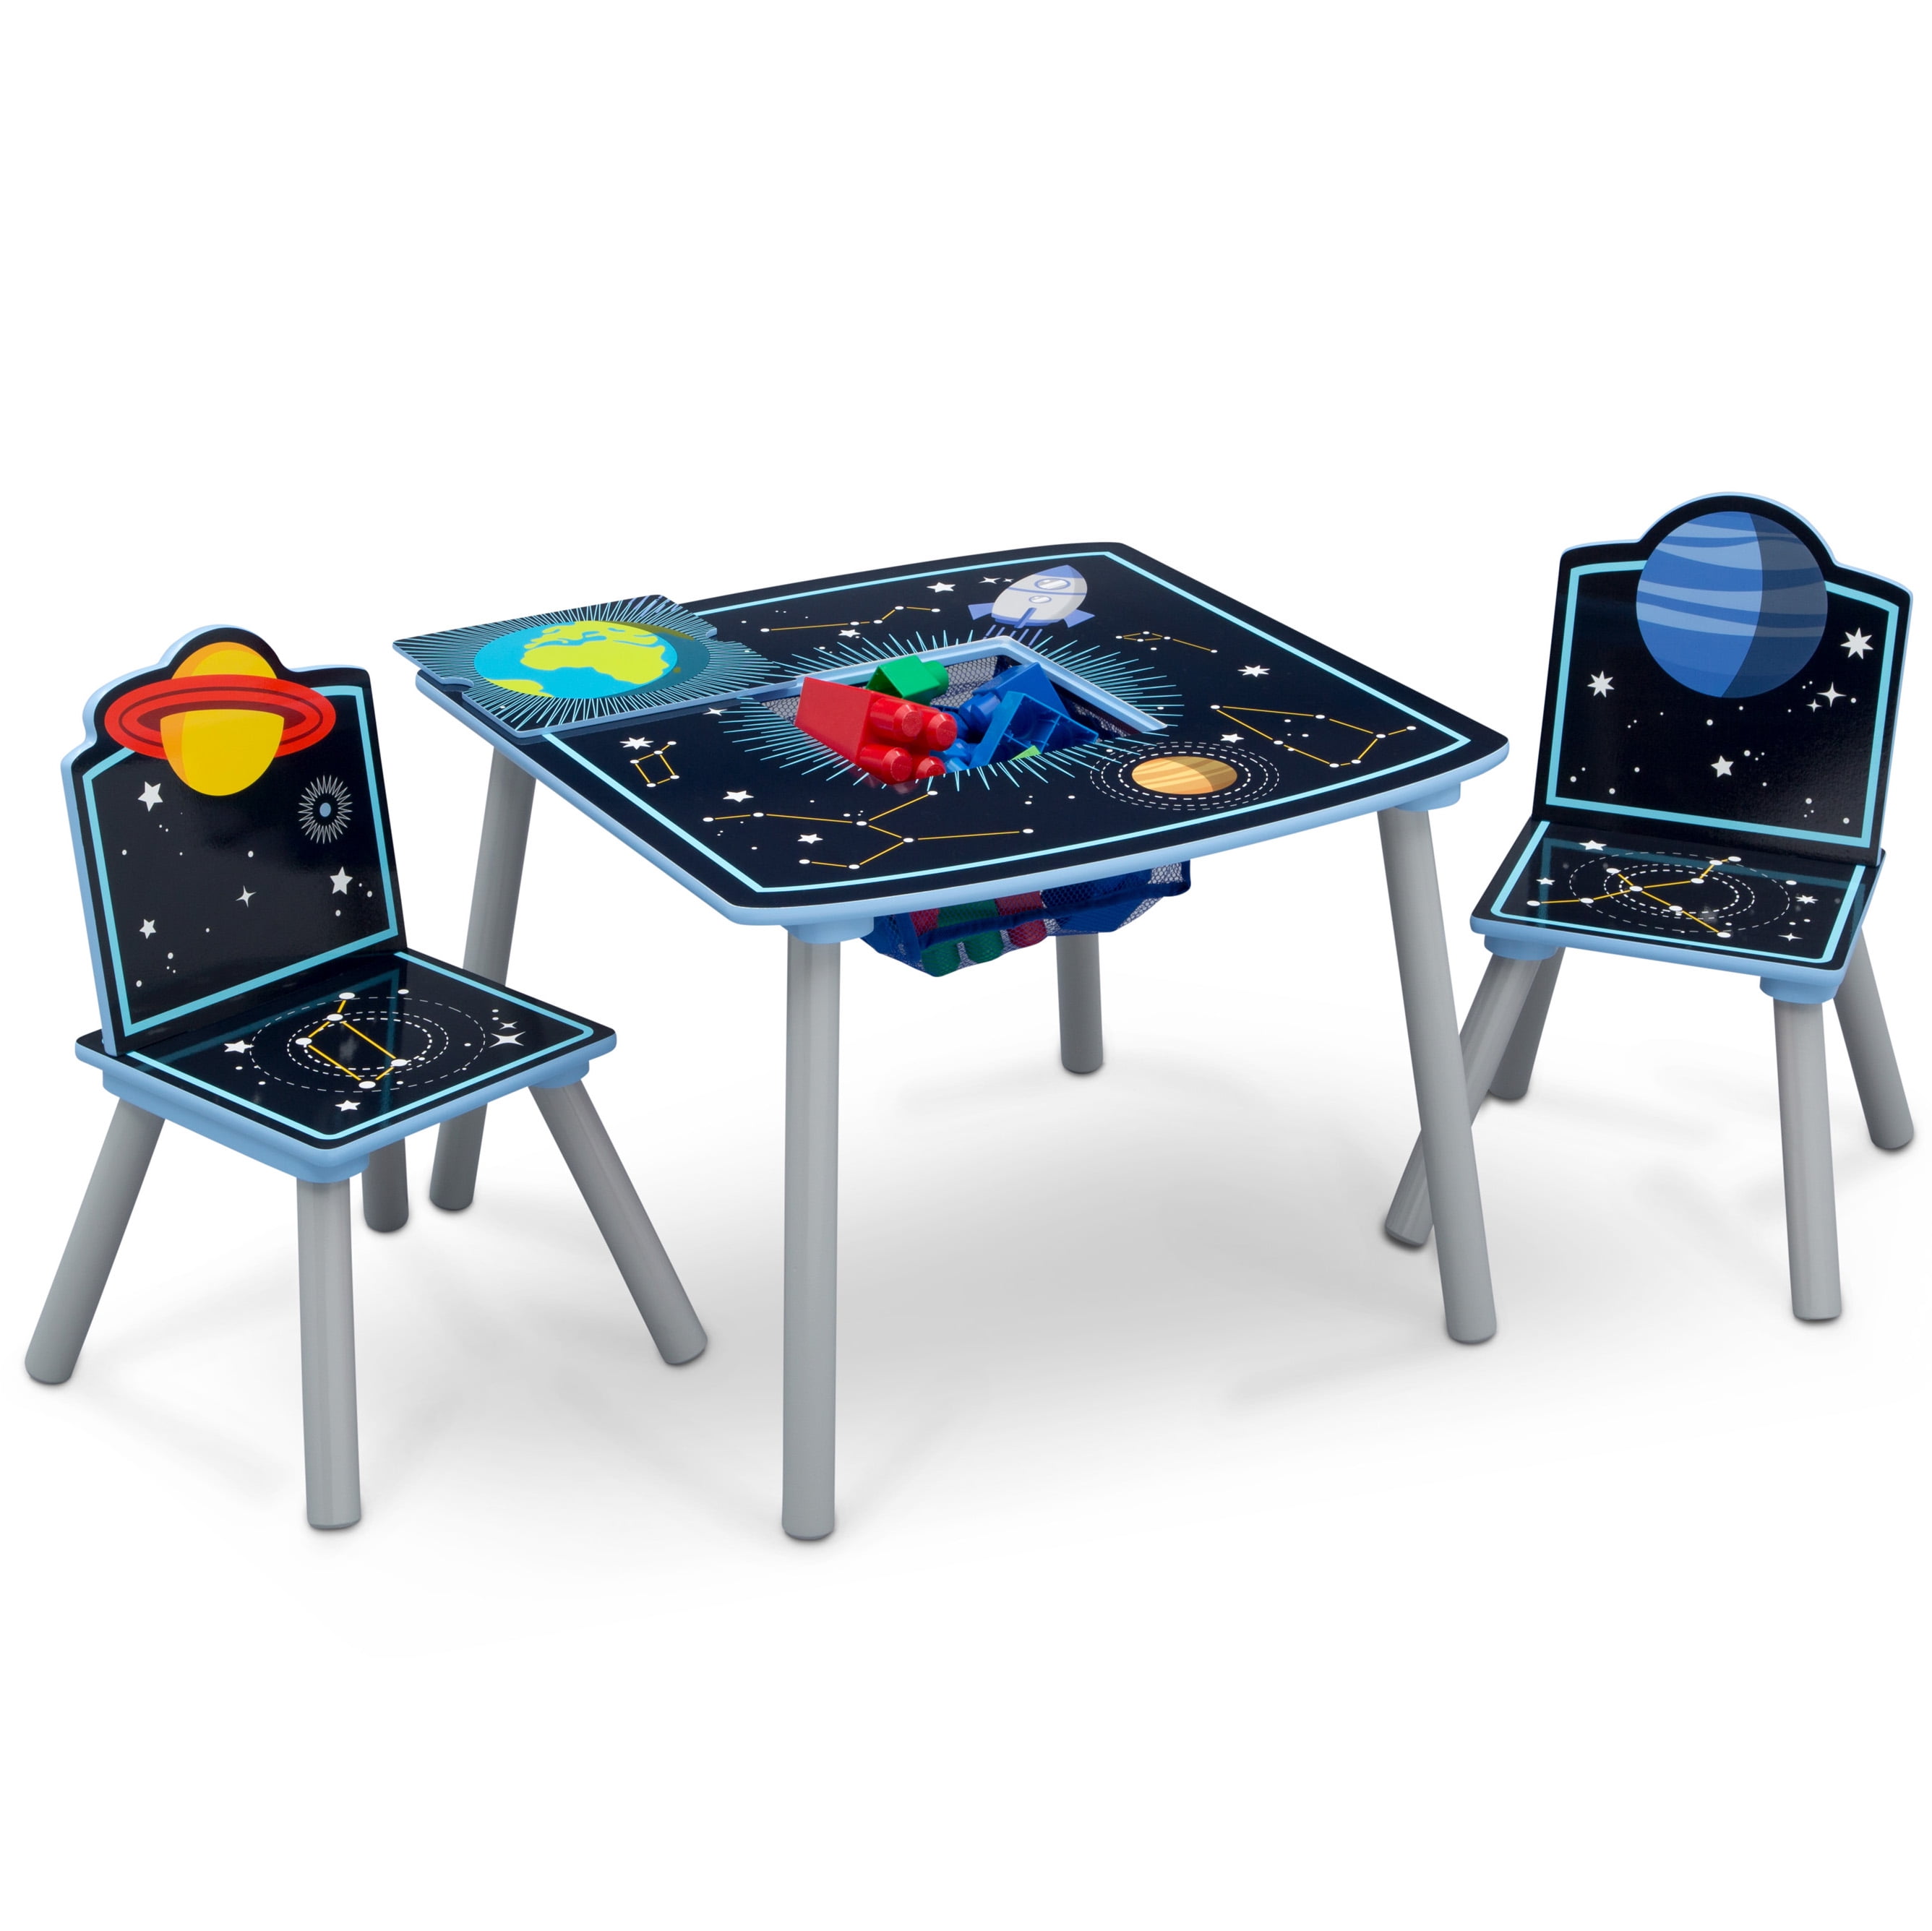 childrens indoor table and chairs